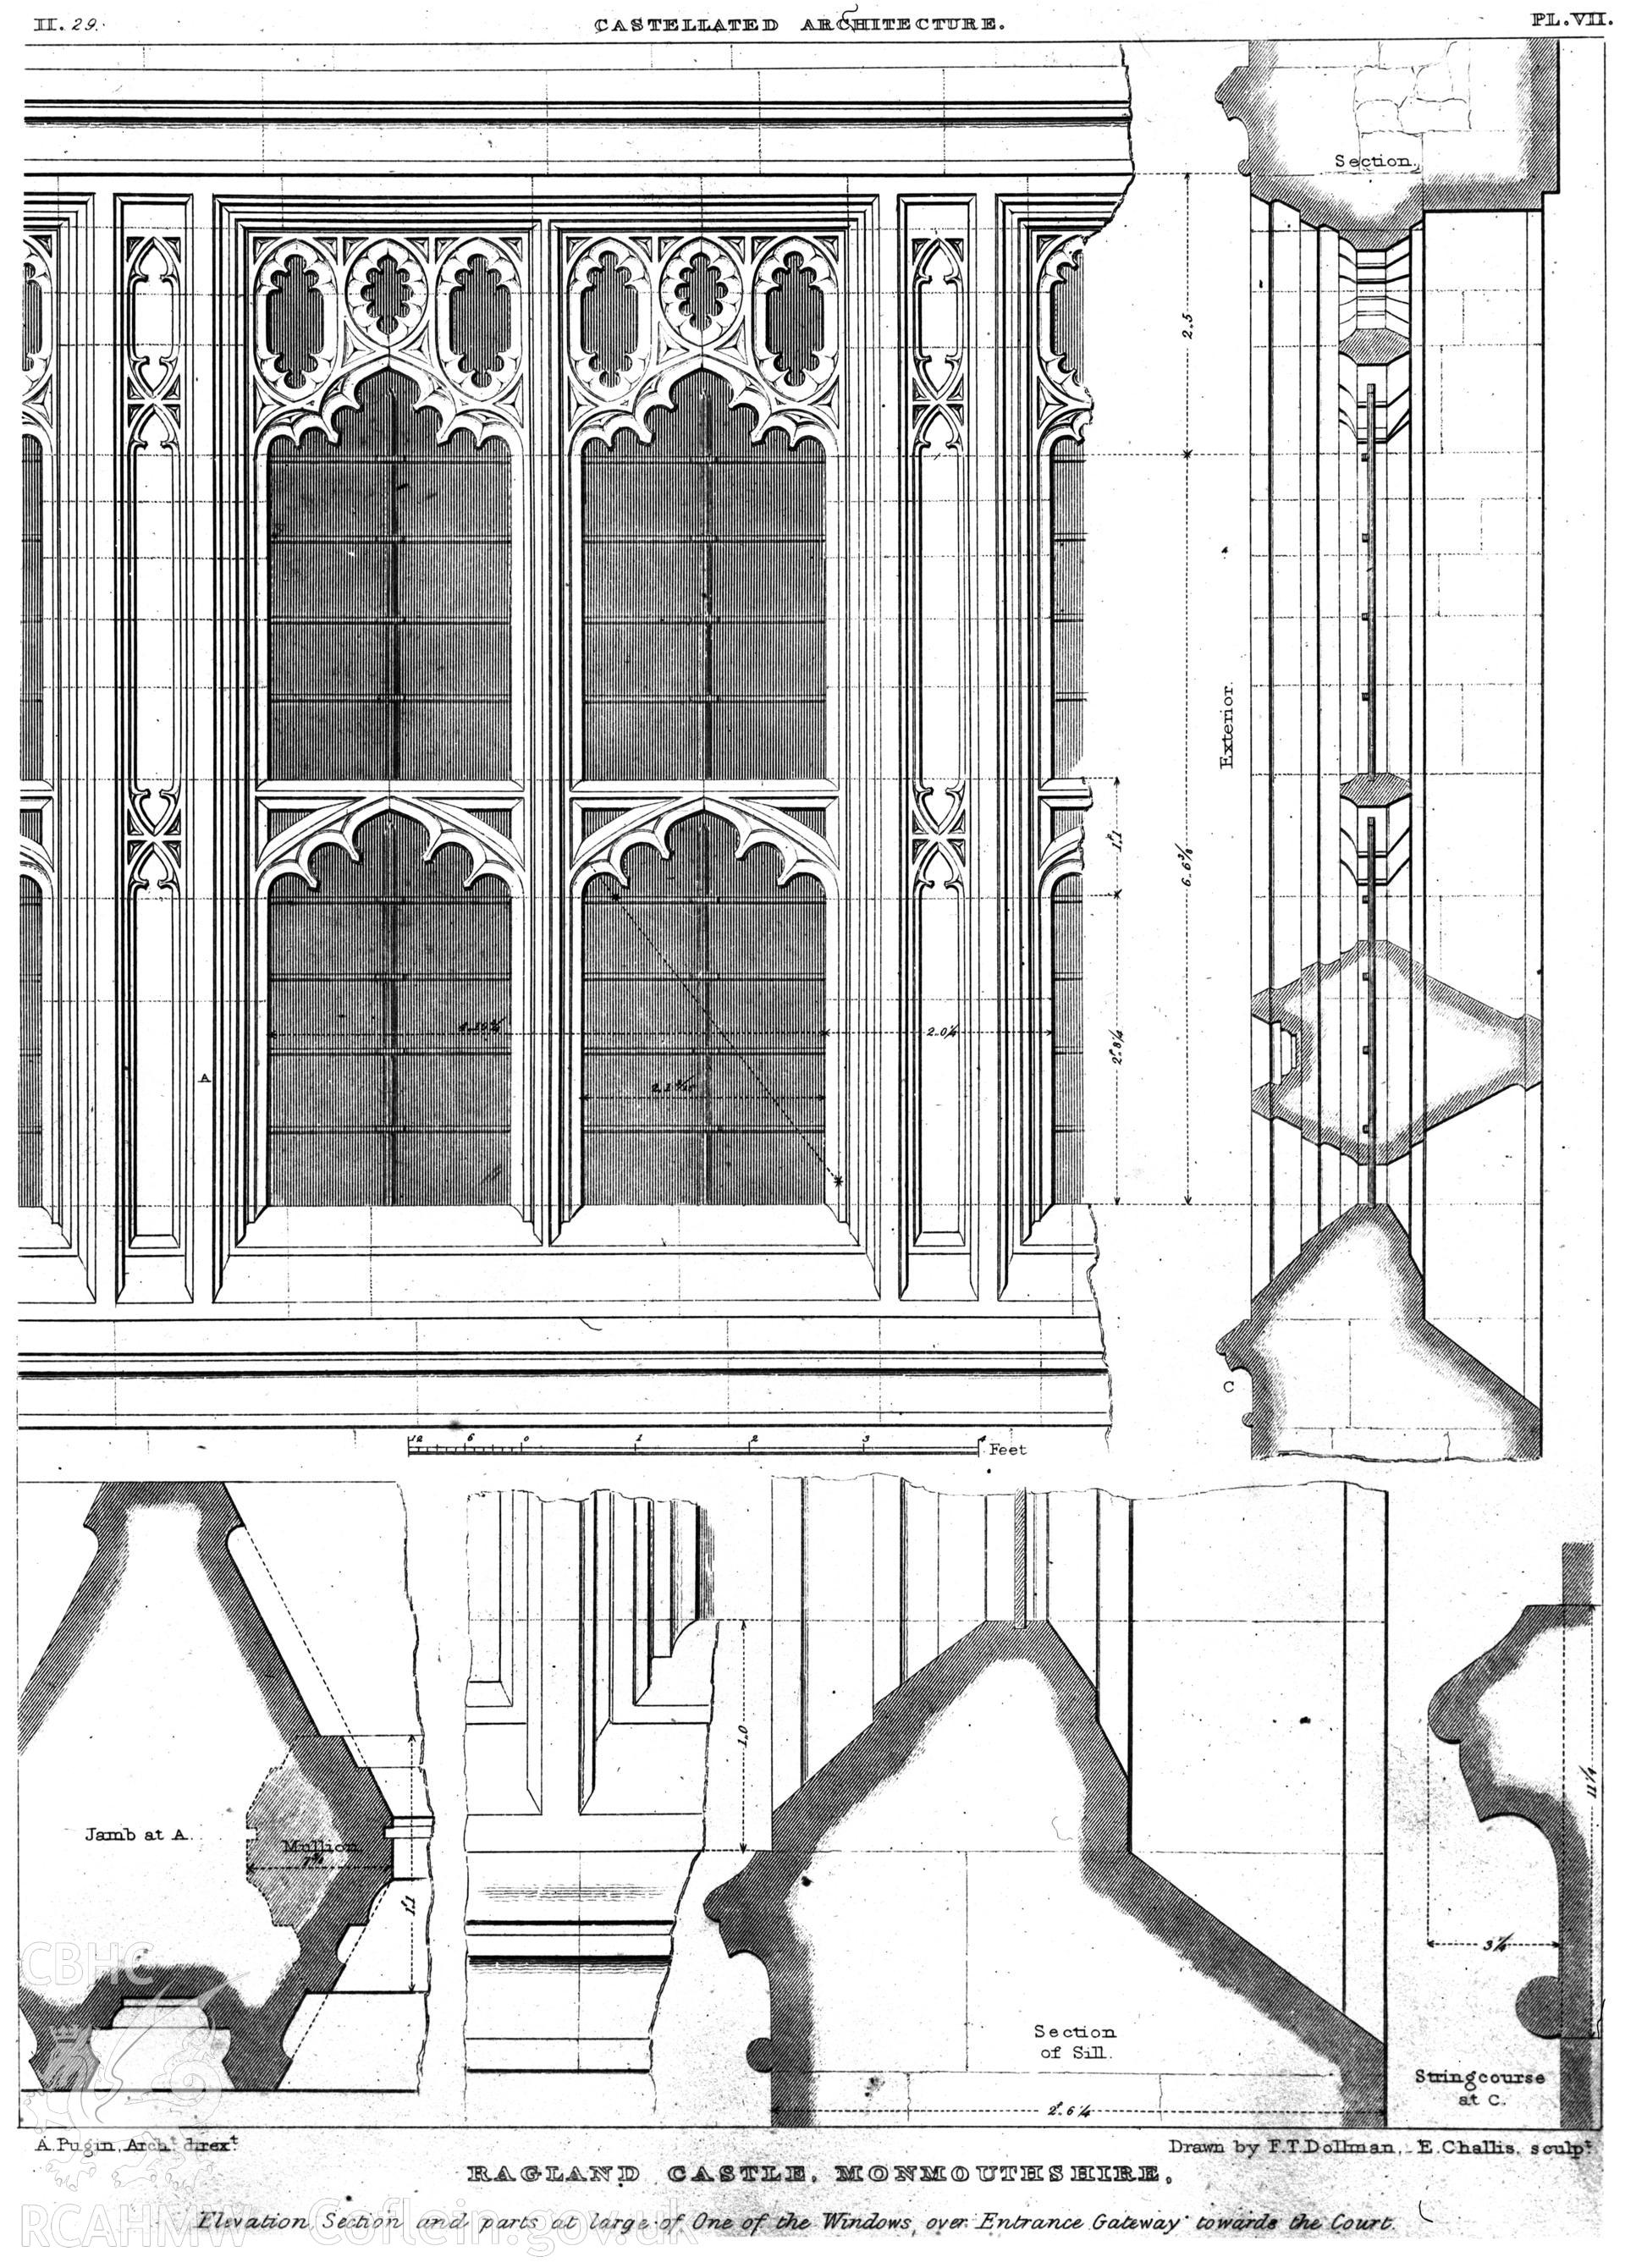 Photographic copy of measured drawing showing elevation, section and detail of a window over the entrance .